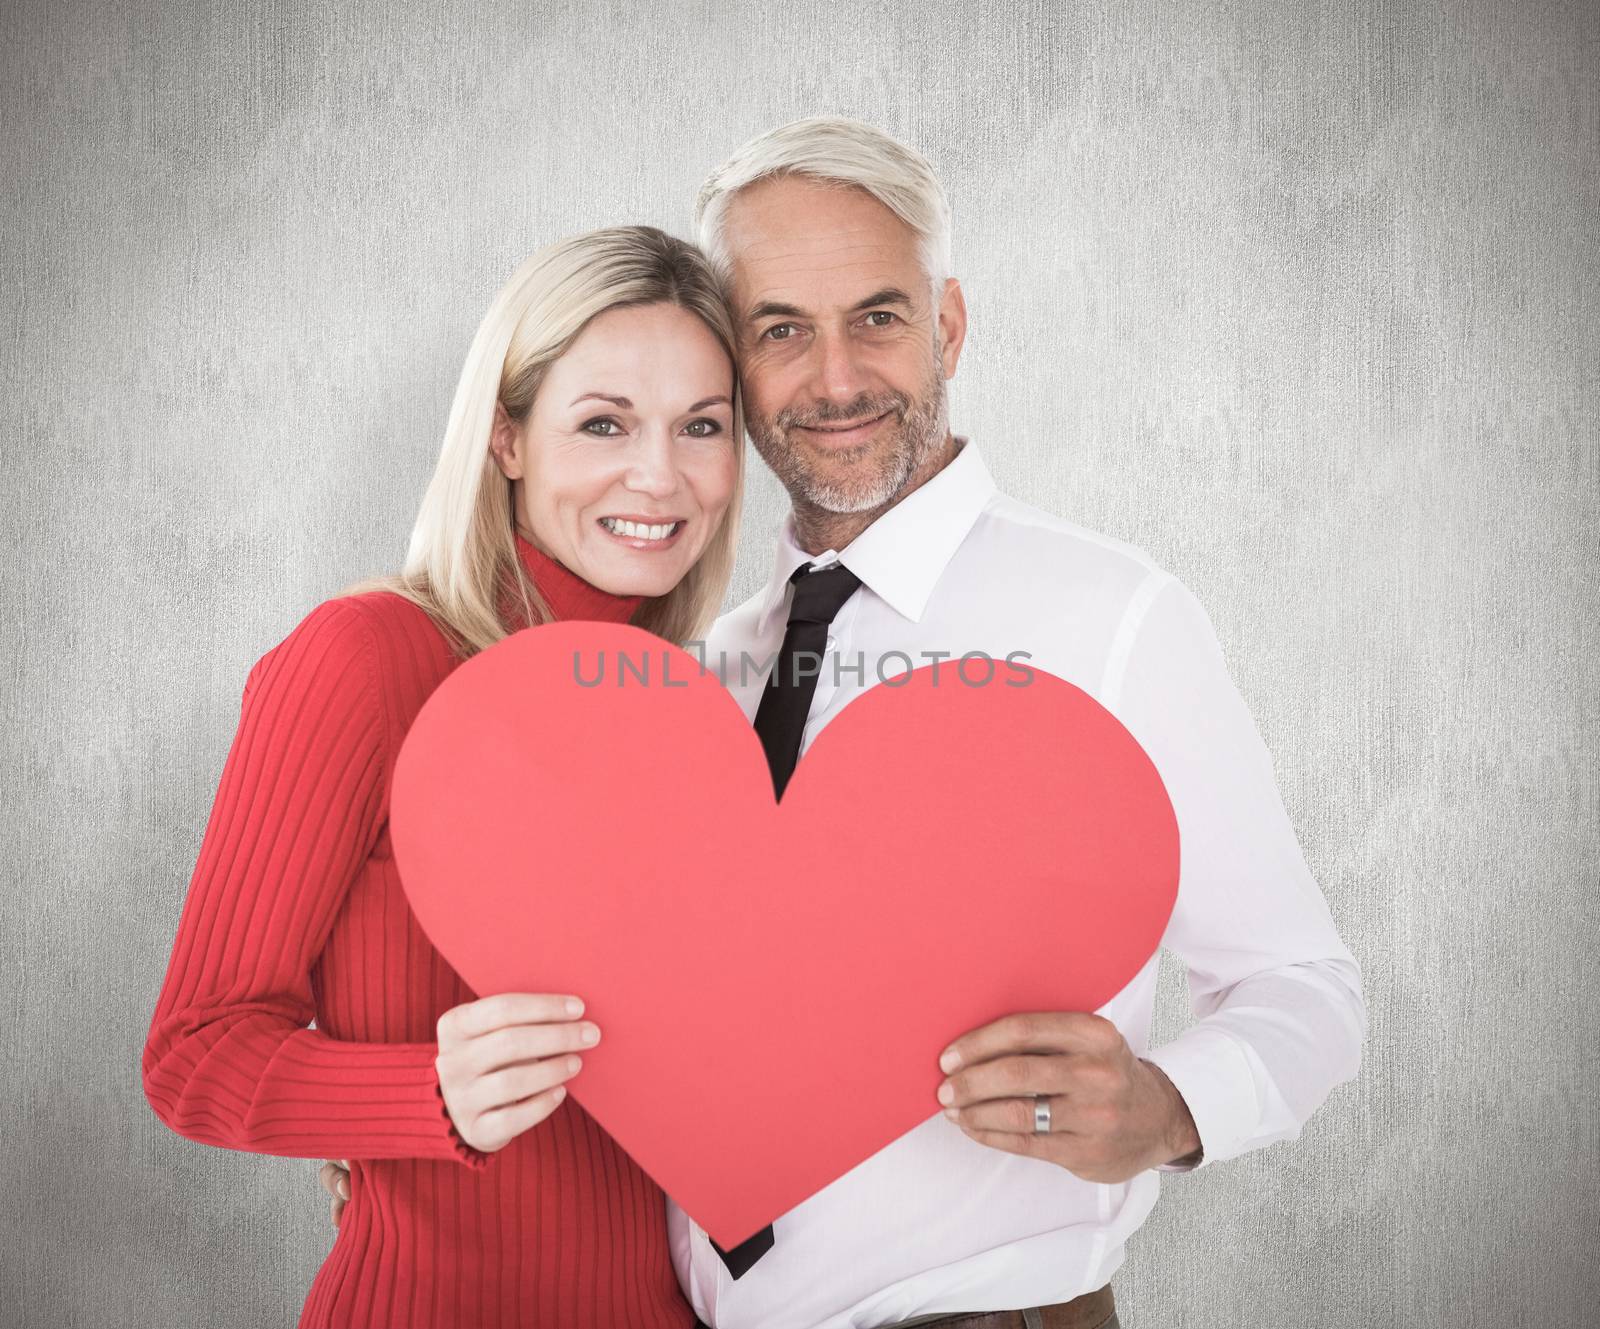 Handsome man getting a heart card form wife against weathered surface 